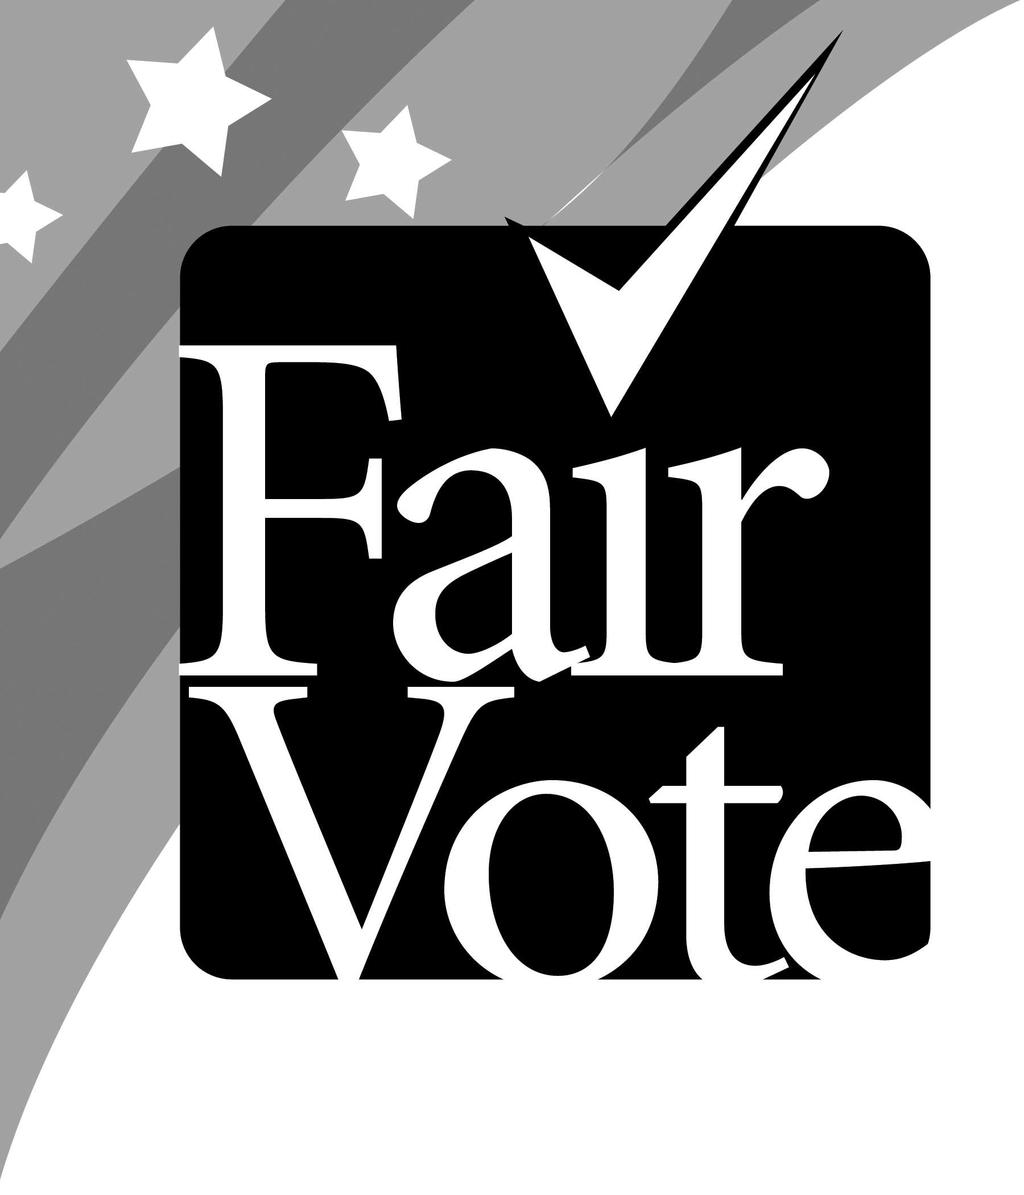 Beyond Single Member Districts and At-Large, Winner-Take-All: A Compromise Plan to Improve Montgomery County Council Elections www.fairvote.org contact: David Moon (301) 270-4616 / dmoon@fairvote.